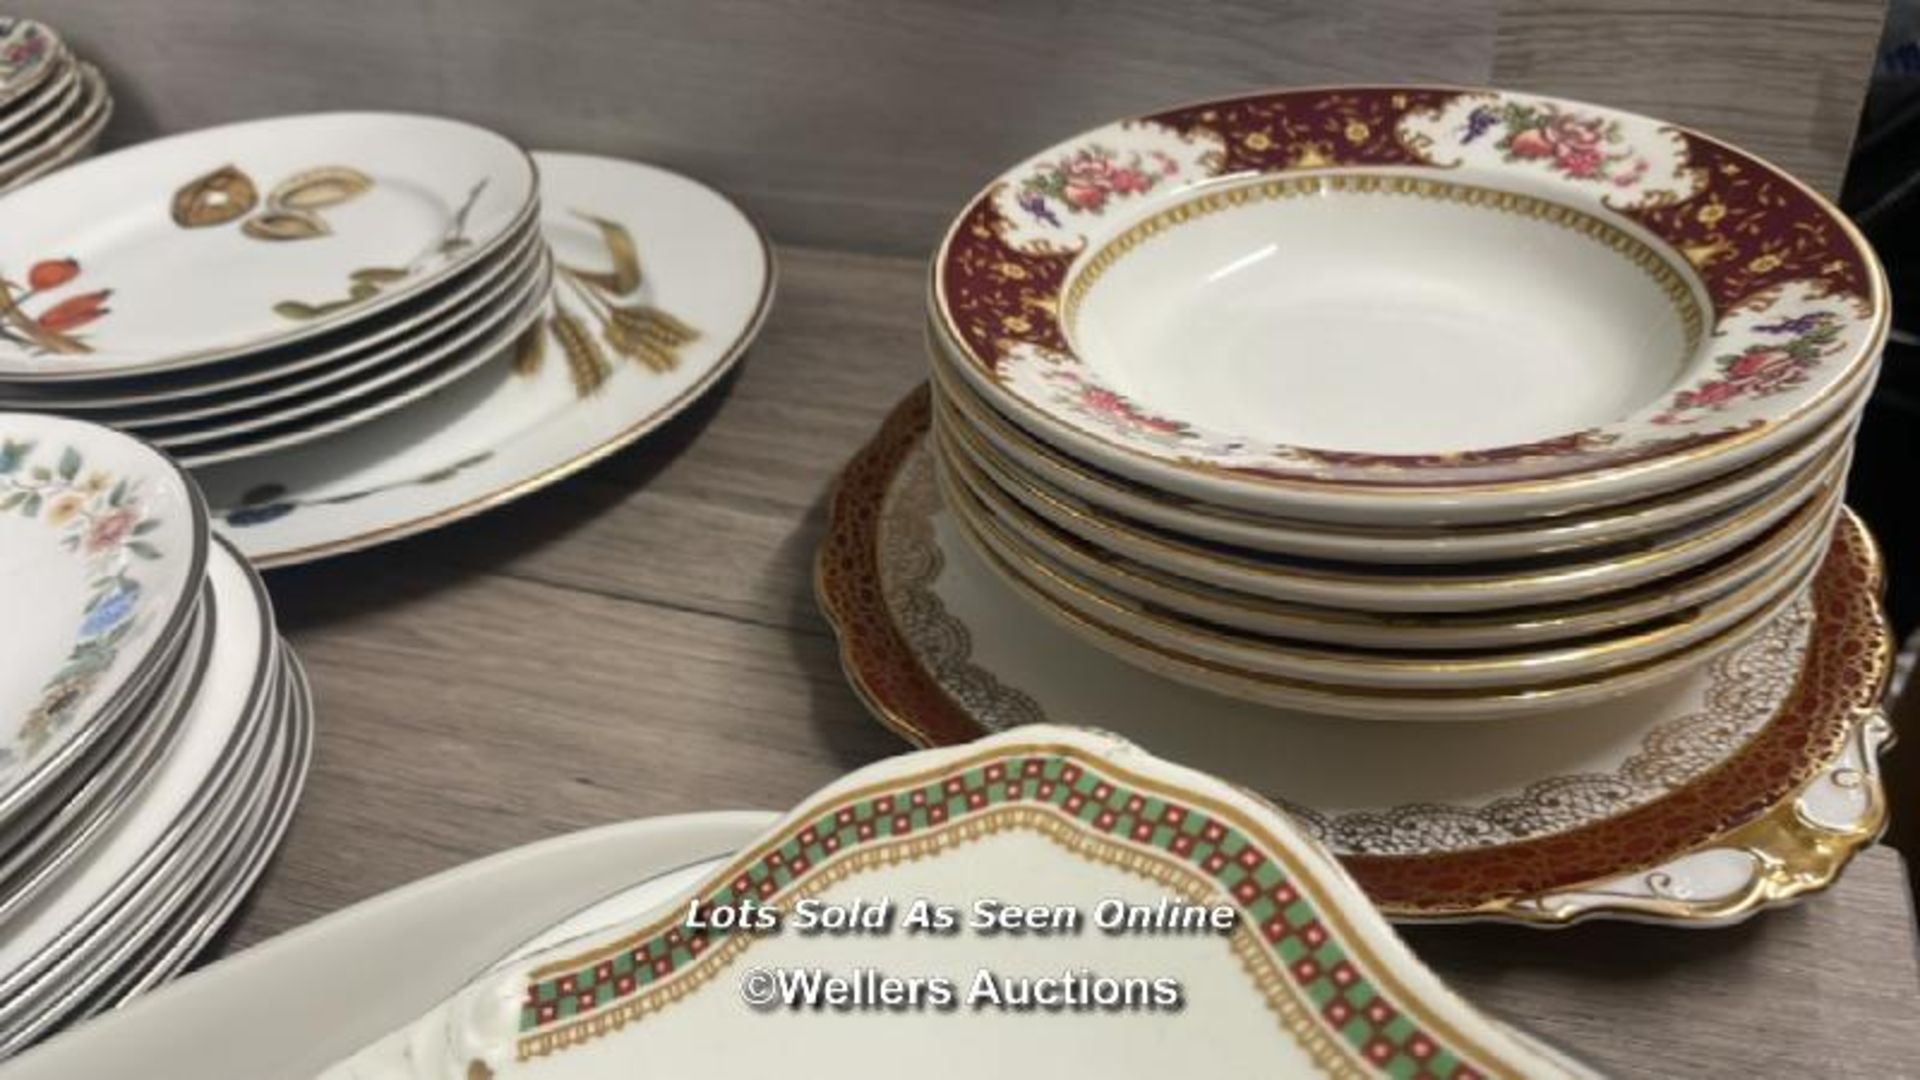 ASSORTED CHINA PLATES AND SAUCERS INCLUDING ROYAL DOULTON "VICTORIA" , ROYAL DOULTON "OLD COLONY" - Image 10 of 13